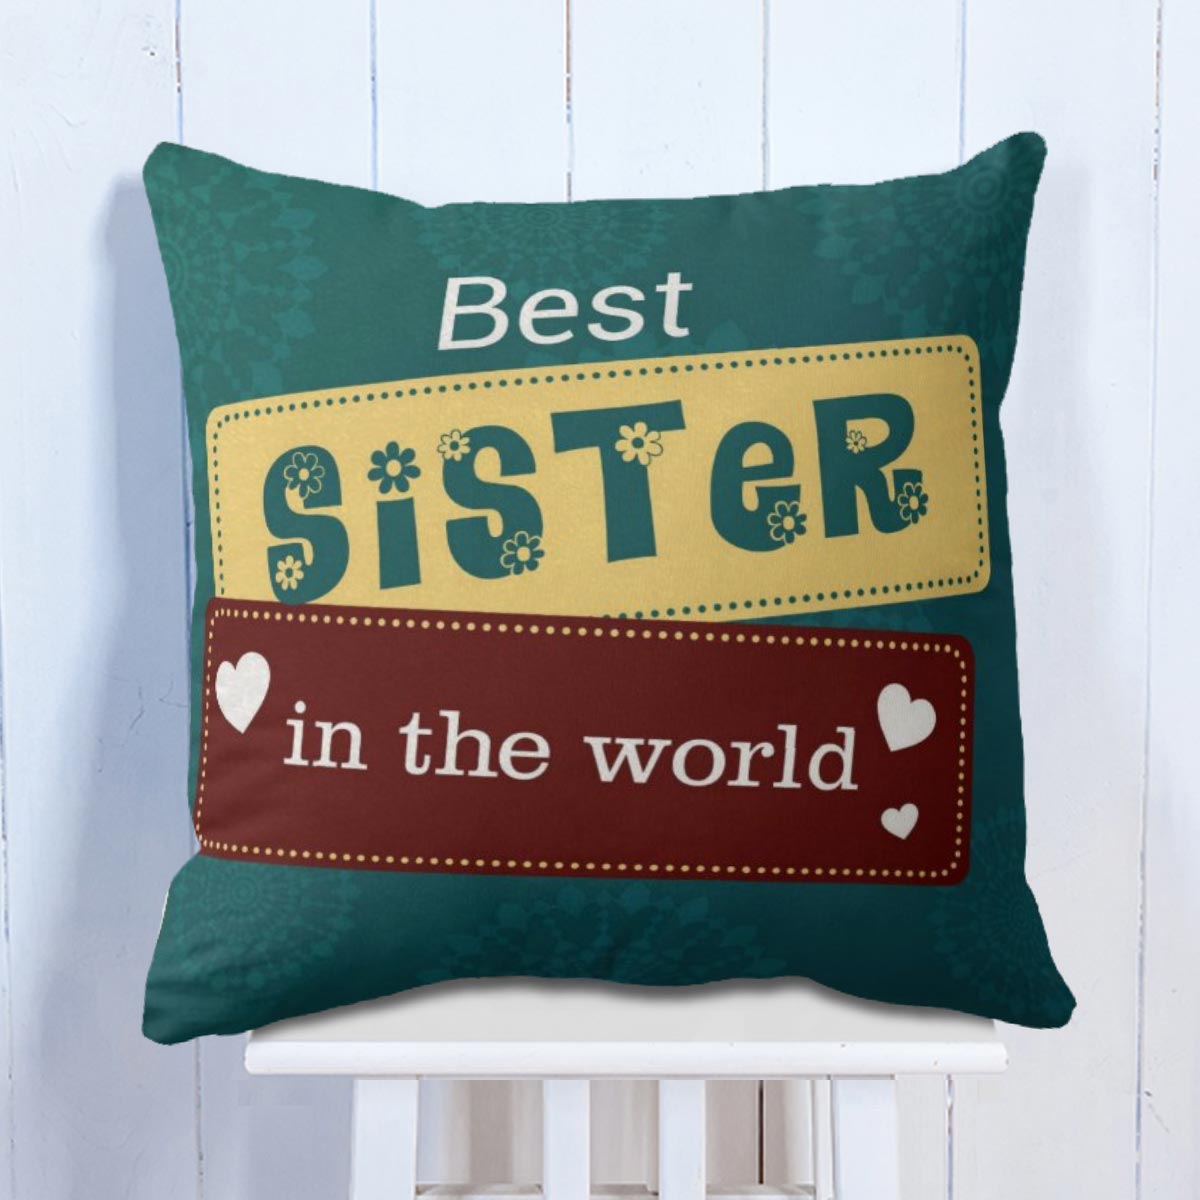 Best Sister in the World Cushion